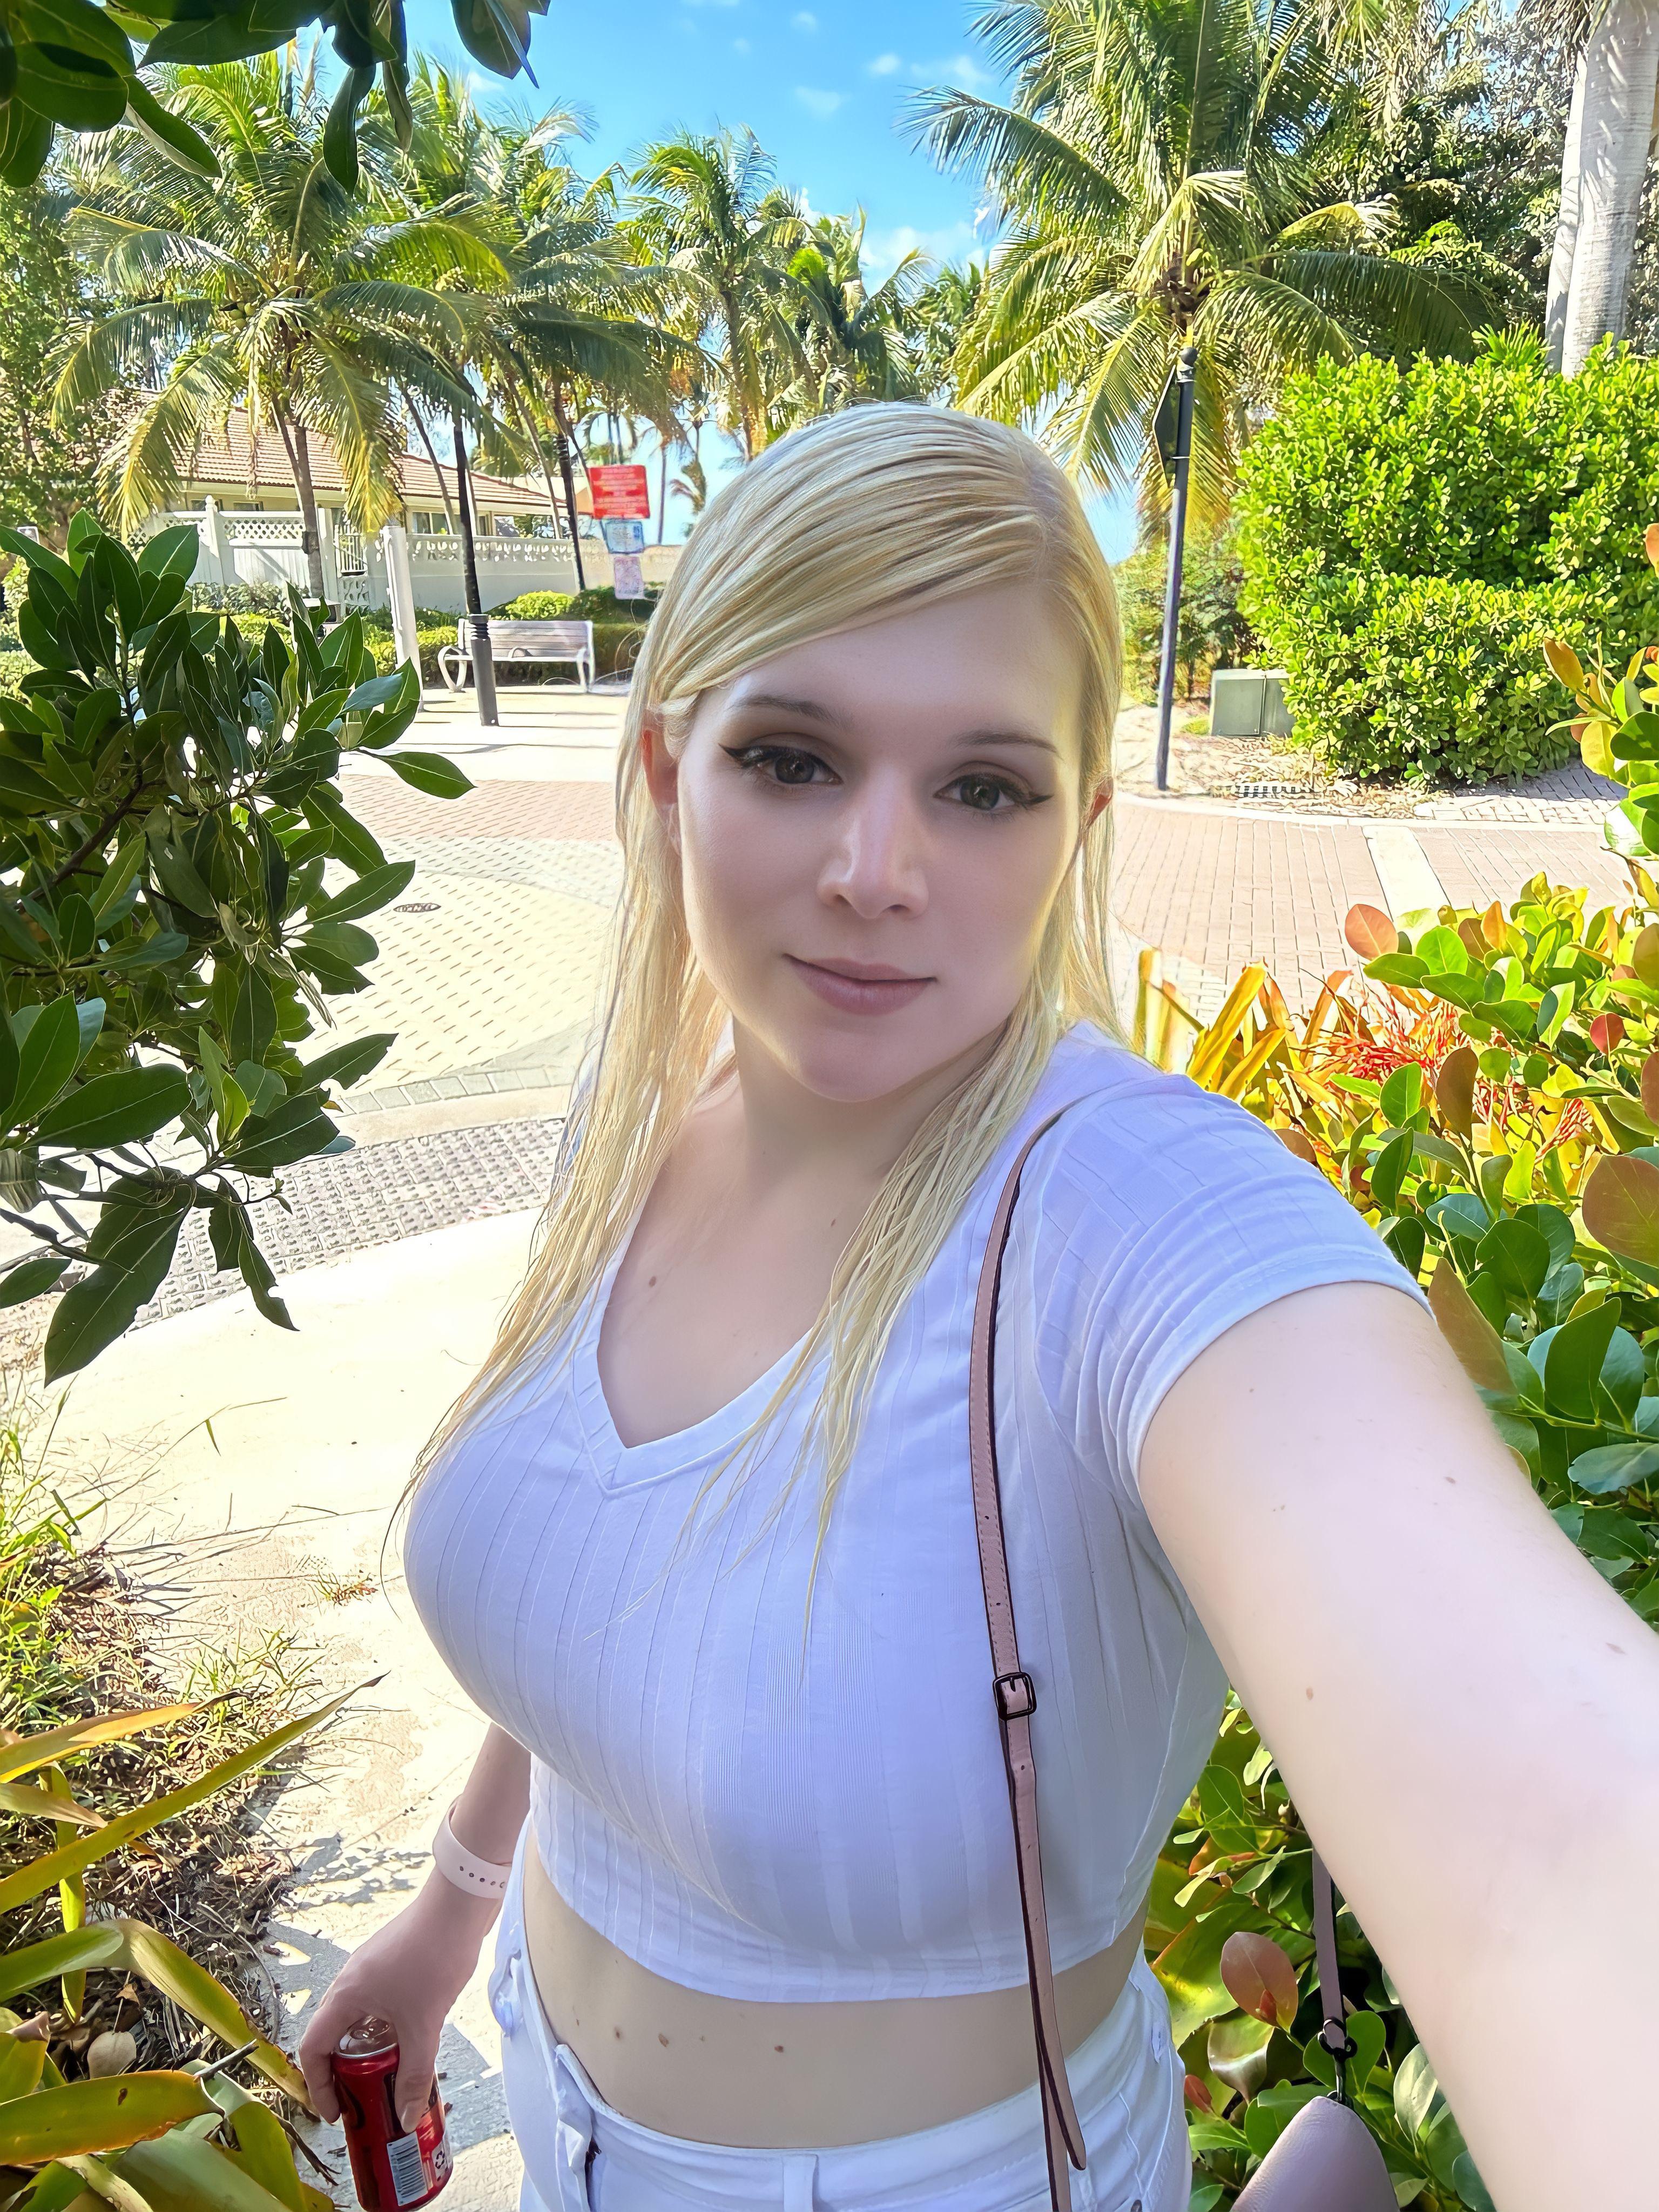 Would you go on a walk with a pretty tgirl? 💖 zckier - transexual woman